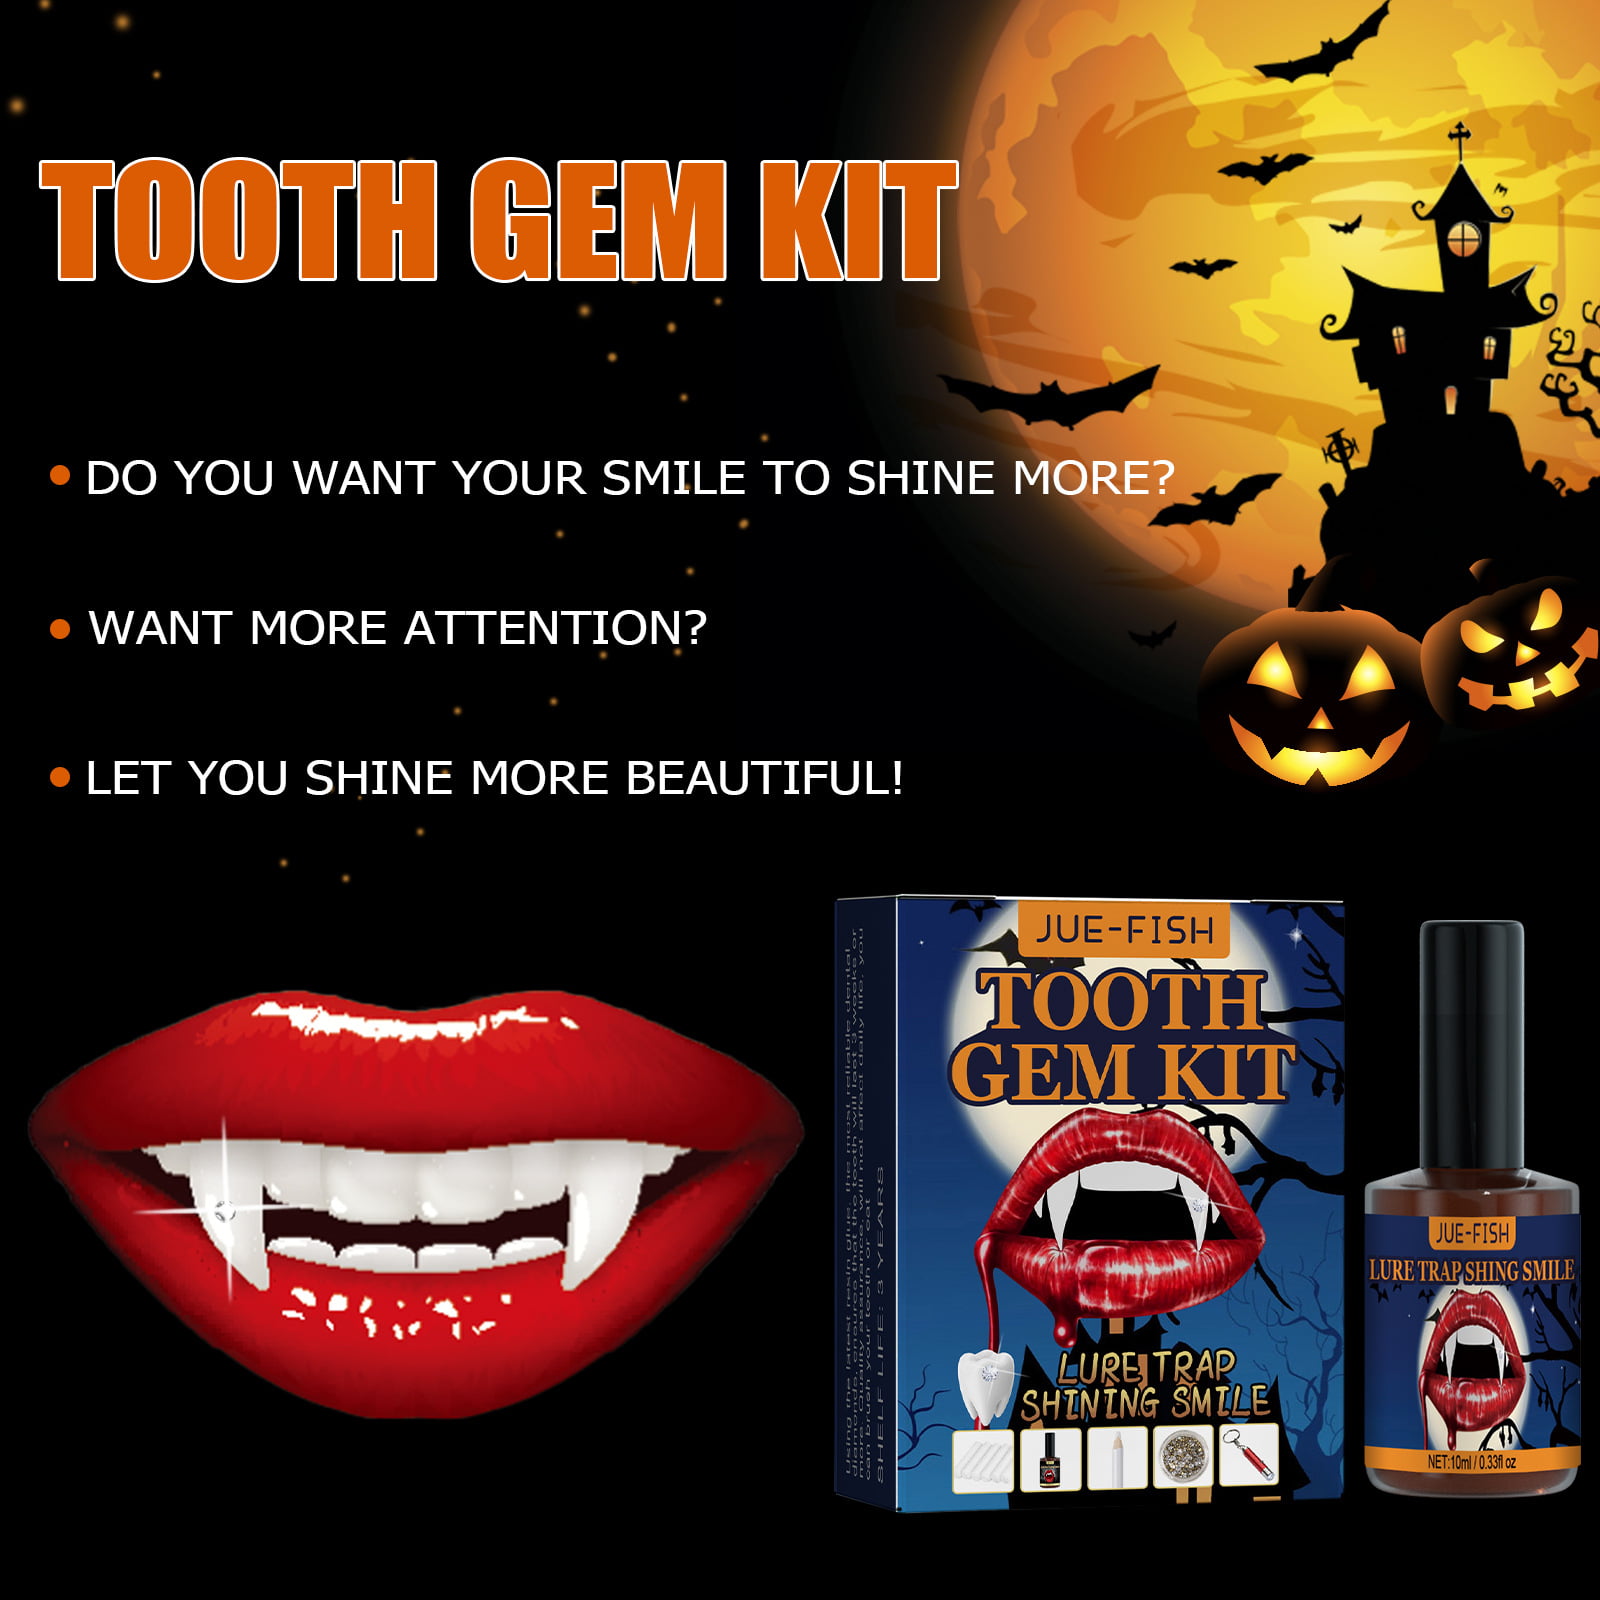 Shiny Tooth Gem Kit With Glues, Light and Crystal Tooth Gems – Smile Kit